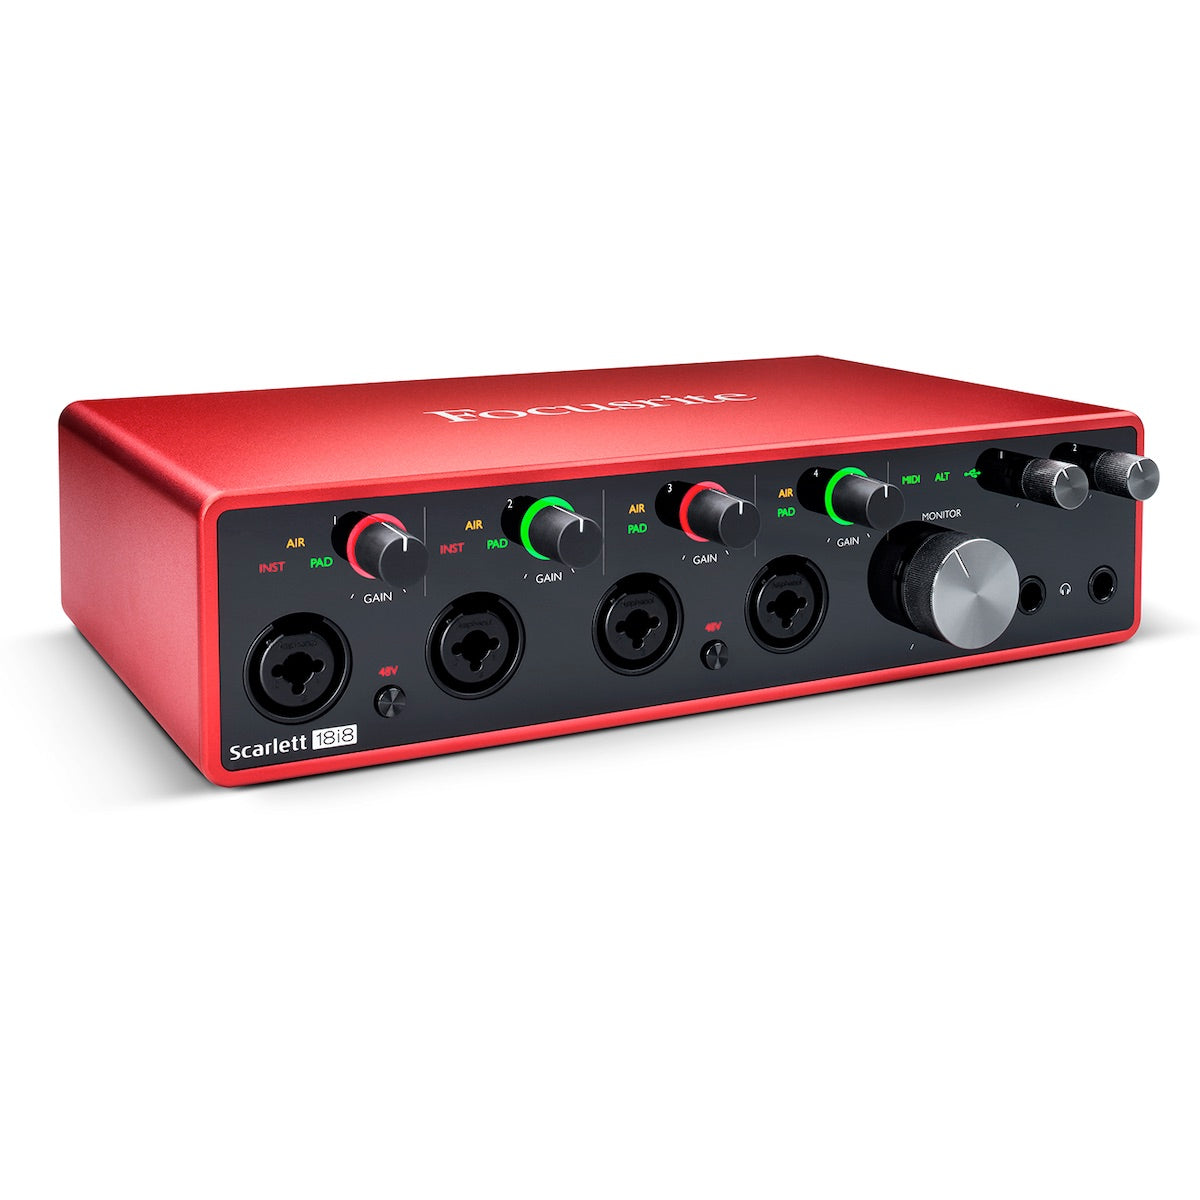 Focusrite Scarlett 18i8 - USB 2.0 Audio Interface with 18-in/8-out (3rd Gen), left